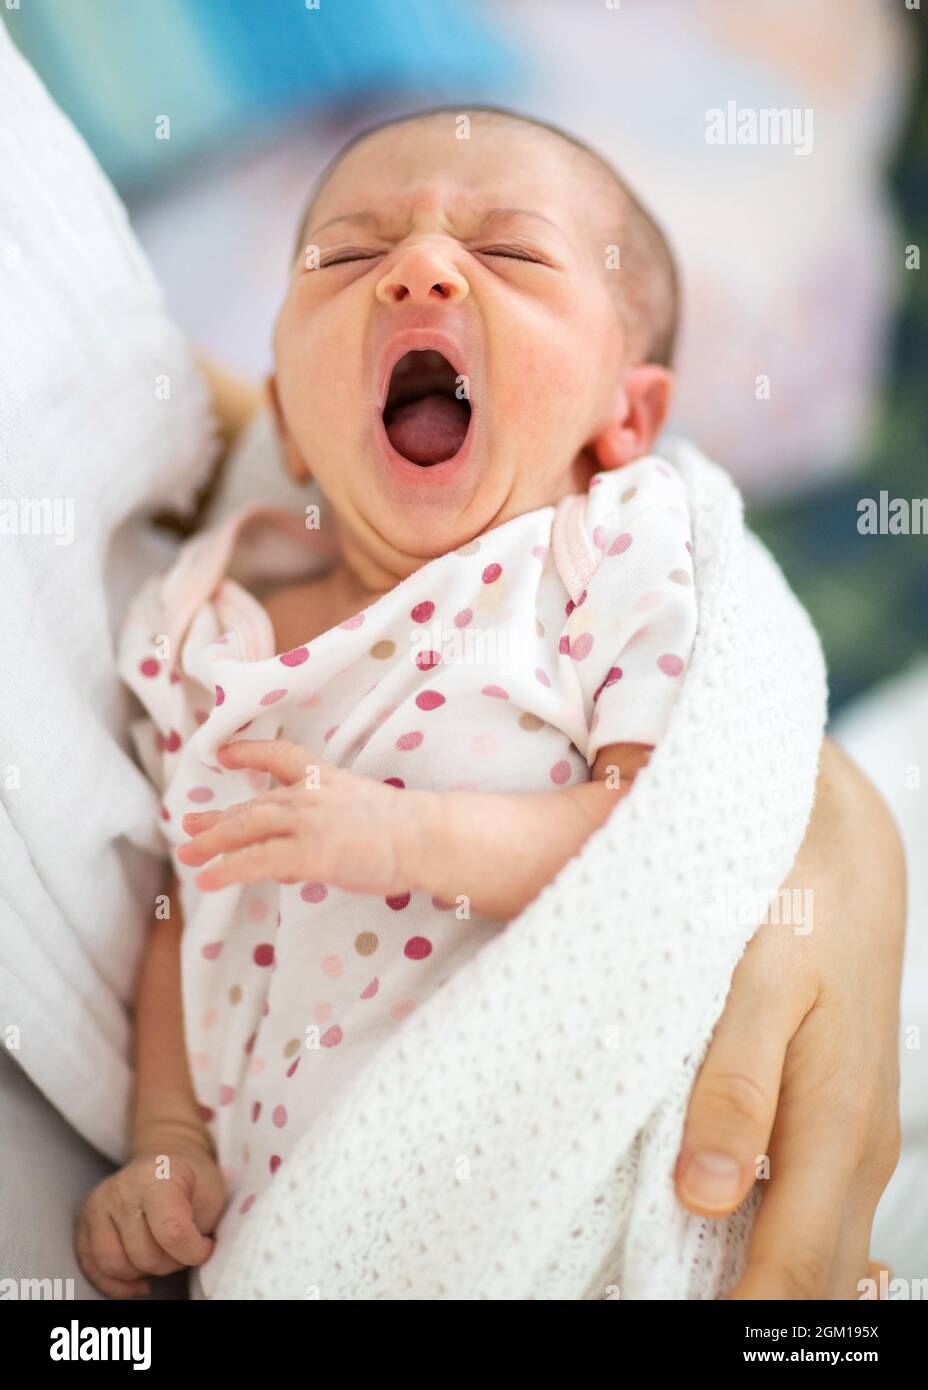 Newborn baby open its mouth and showing tongue Stock Photo